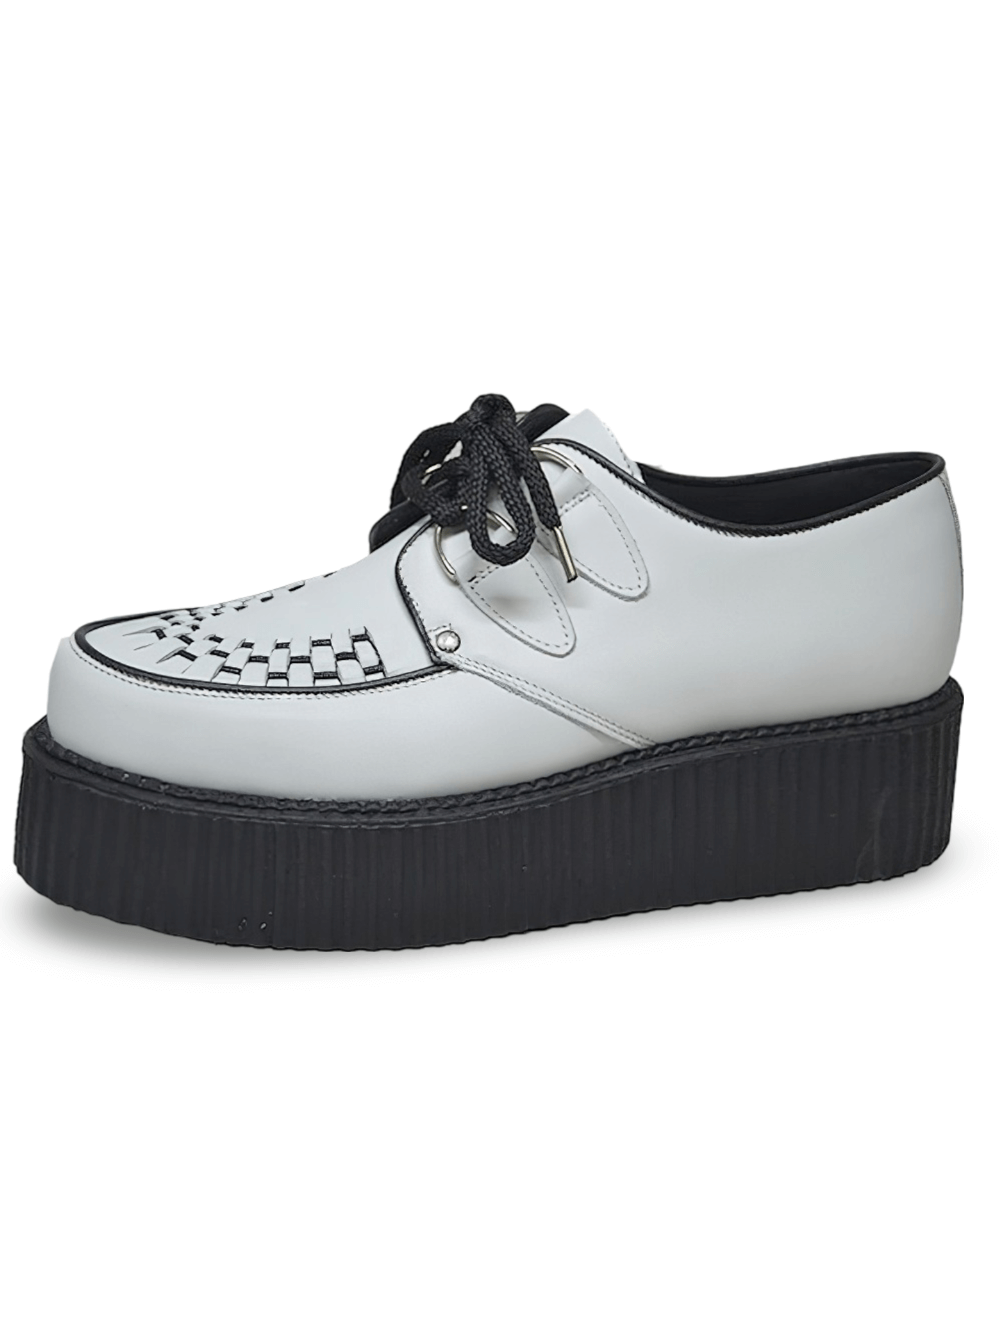 White Grained Leather Creepers with Double Rubber Sole